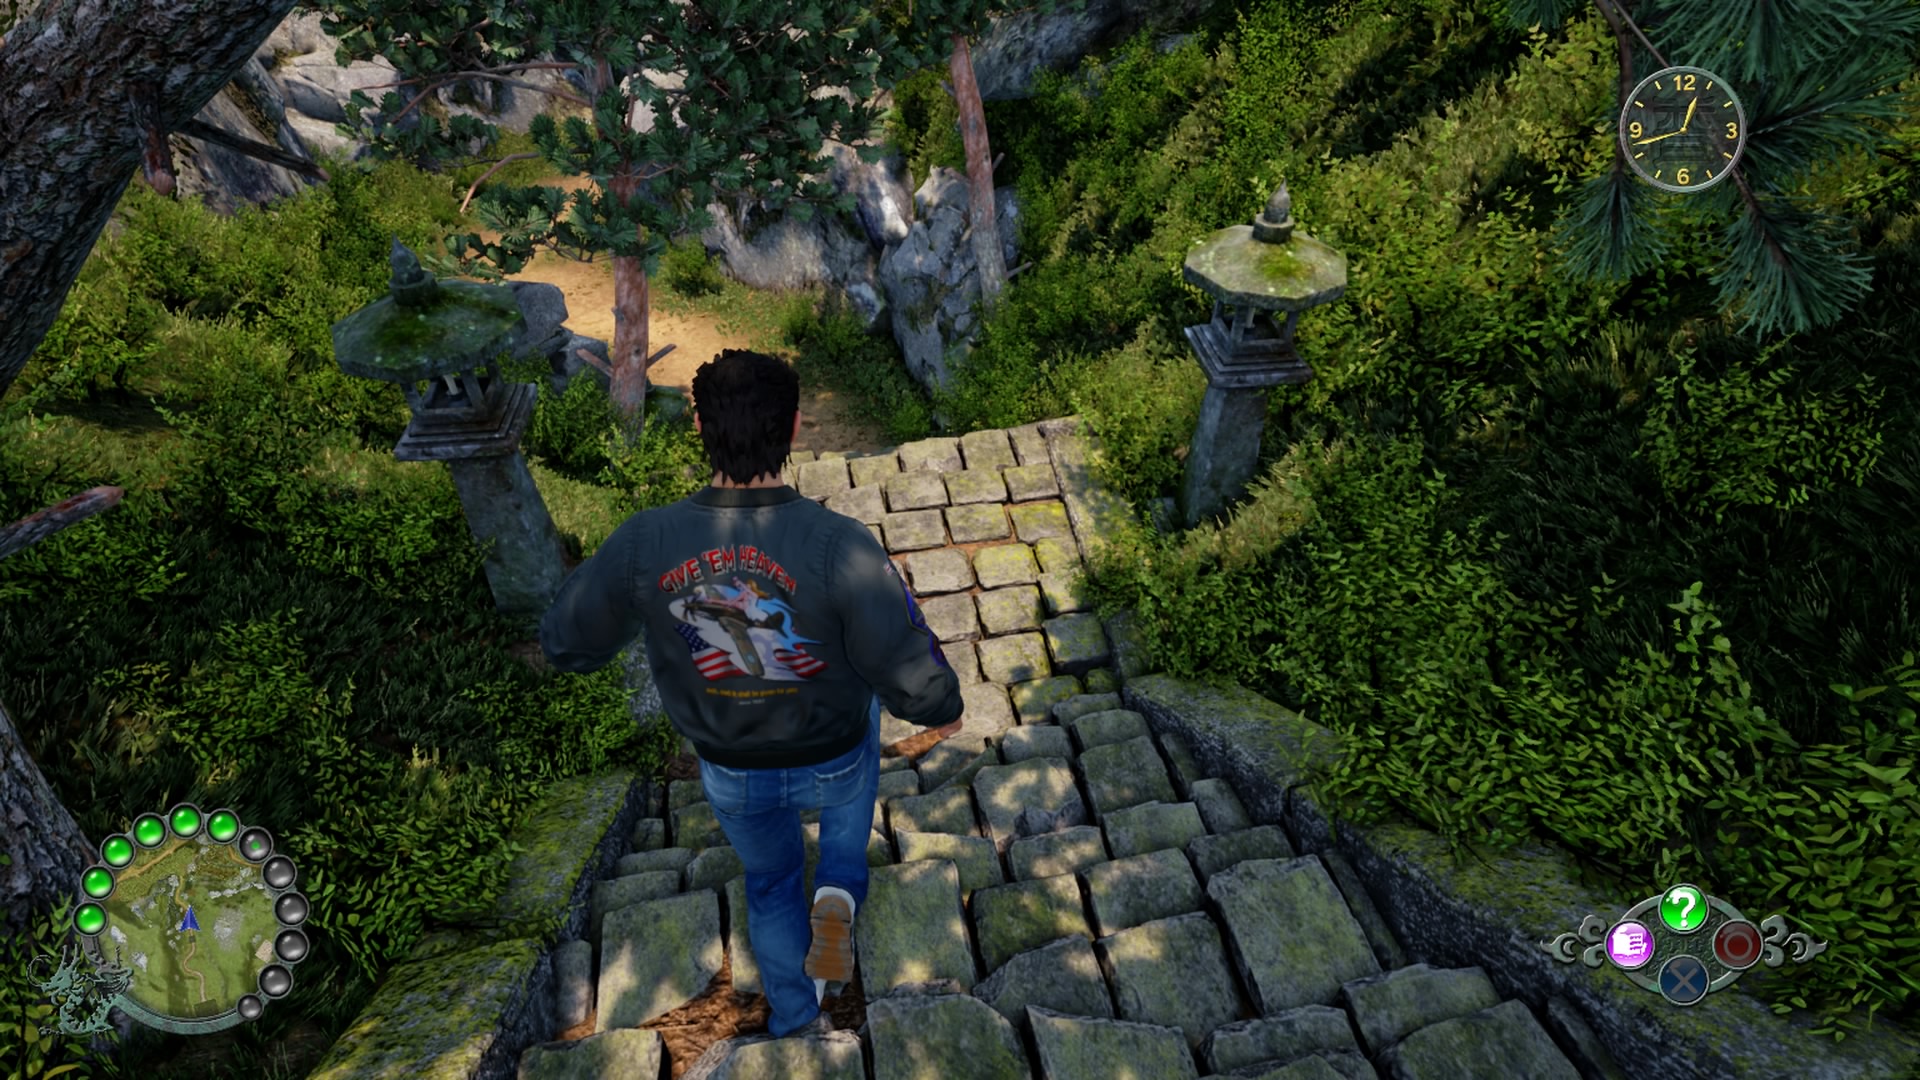 Shenmue iii test